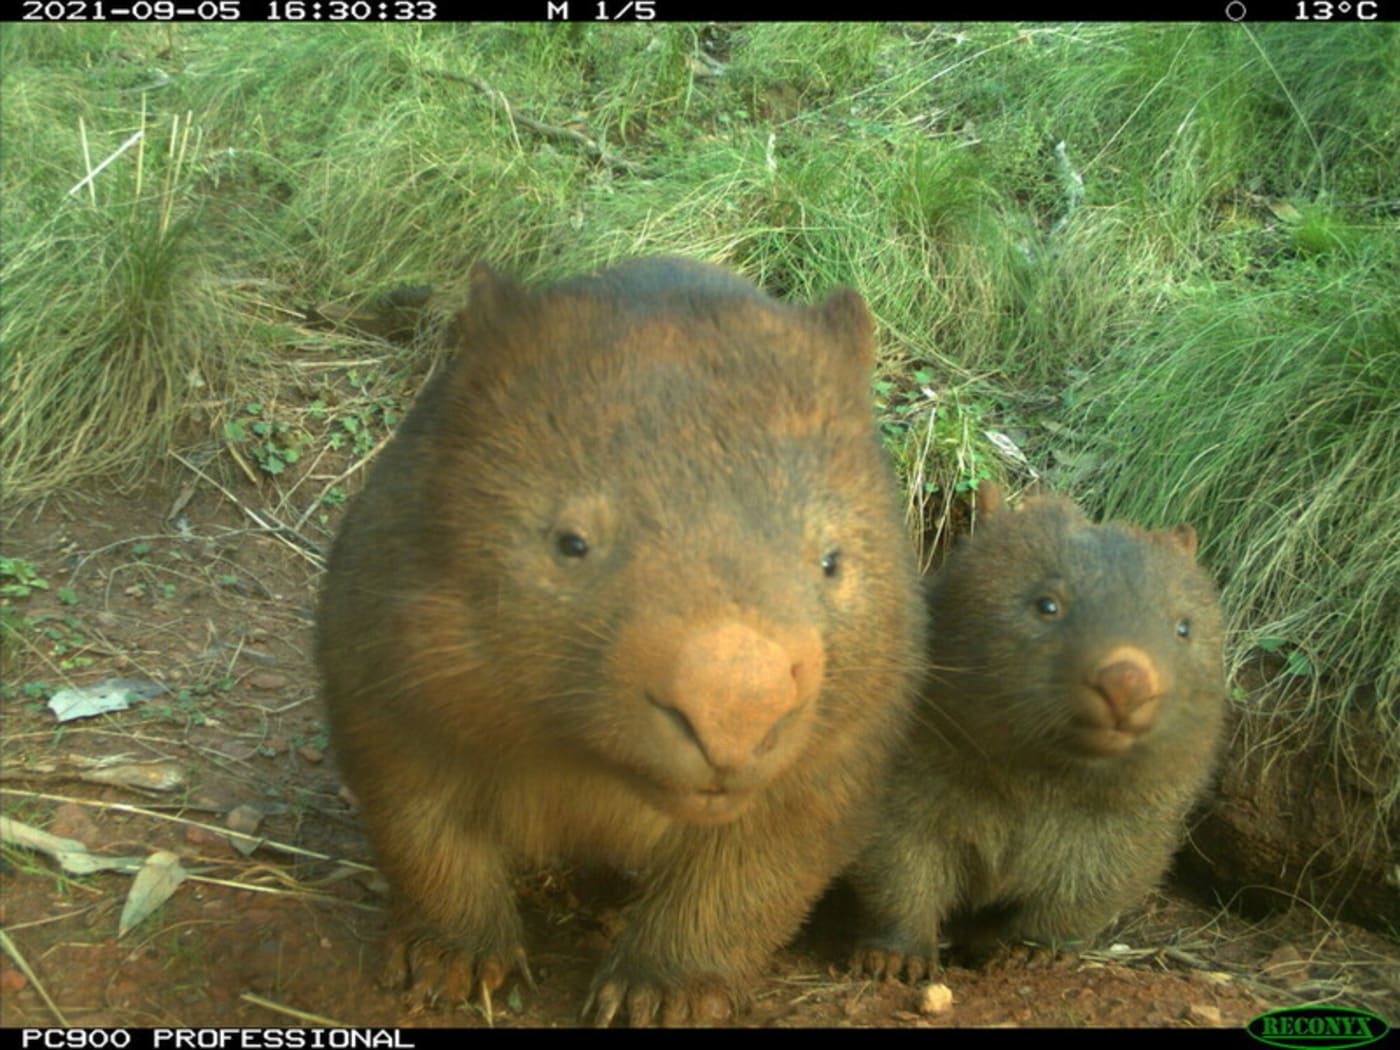 A sensor camera photo of a mother wombat and her in joey taken in the Southern Ranges in NSW as part of the Eyes on Recovery project.

Eyes on Recovery is a large-scale sensor camera project. and a collaboration between WWF, Conservation International, and local land managers and research organisations. Google-powered AI technology has been trained to identify Australian animals in photos to track the recovery of threatened species following the 2019-20 bushfires.